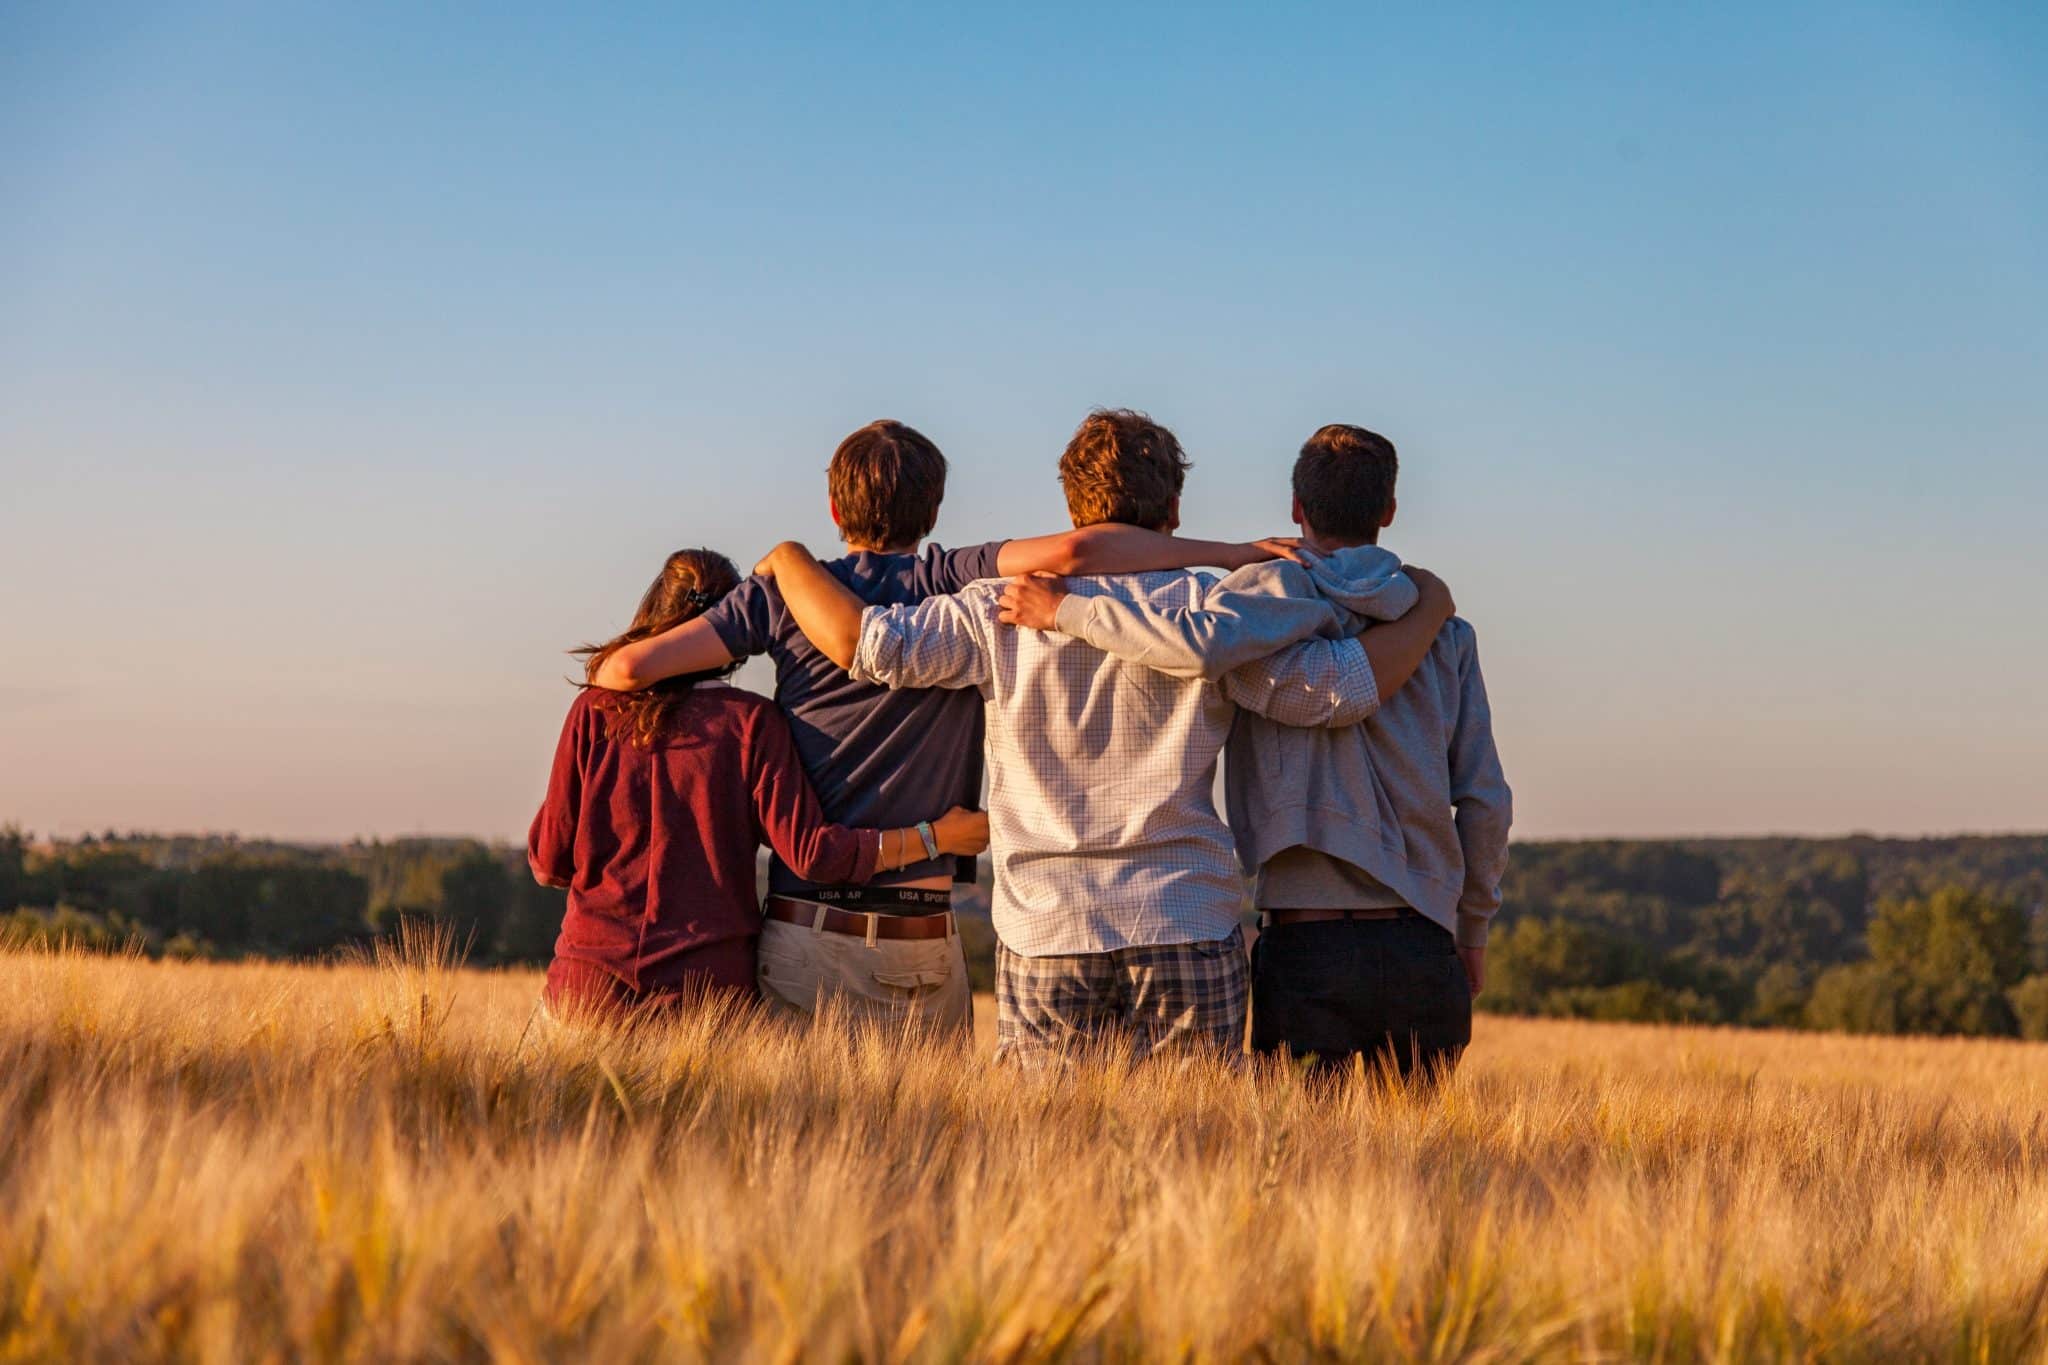 Group of friends embracing by Dim Hou for Unsplash